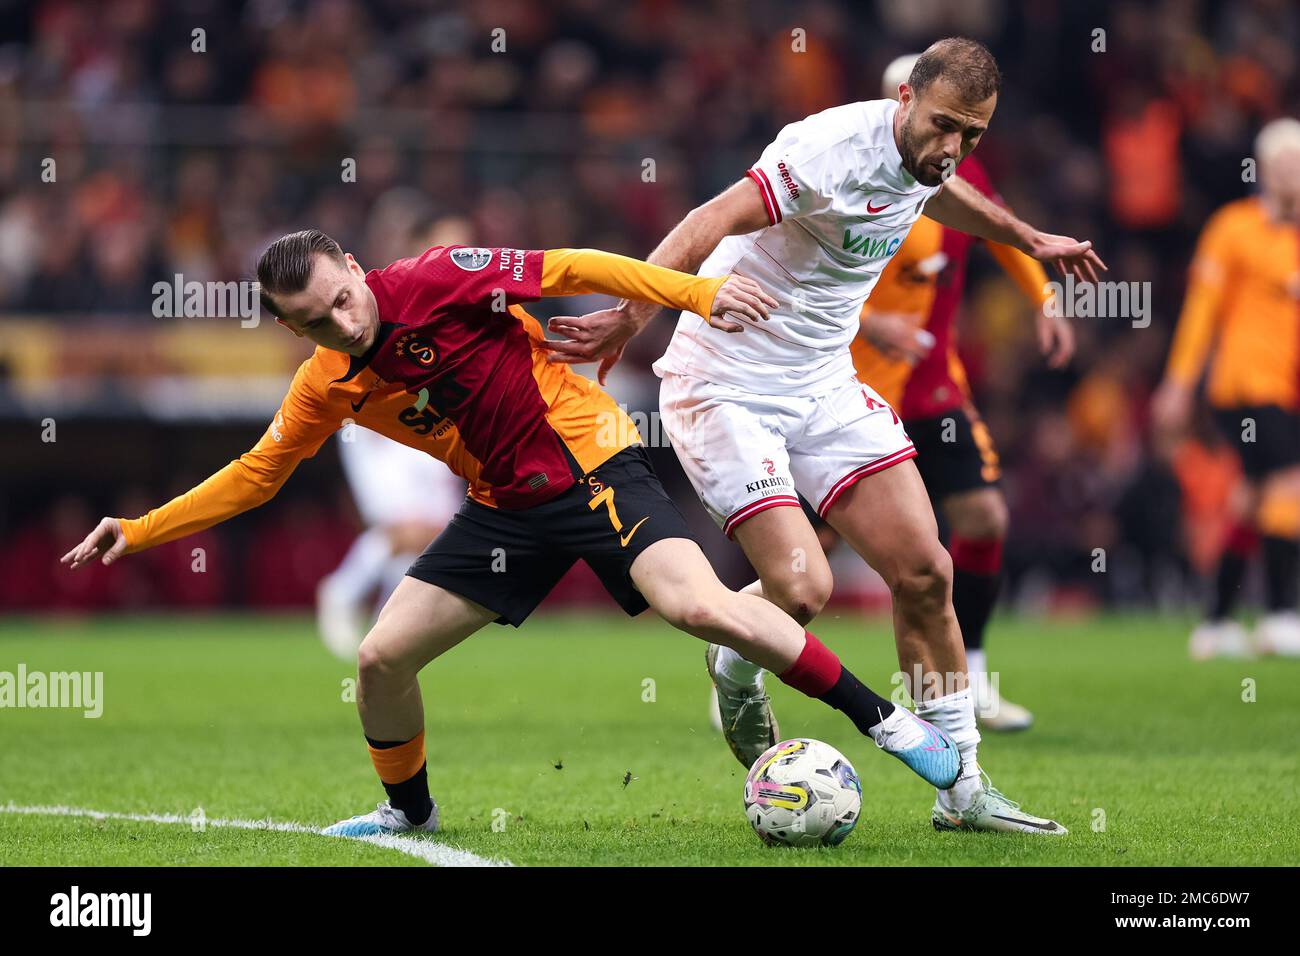 ISTANBUL, TURKEY - JANUARY 21: Kerem Akturkoglu of Galatasaray SK and Admir Mehmedi of Antalyaspor battle for possession during the Super Lig match between Galatasaray SK and Antalyaspor at the NEF Stadium on January 21, 2023 in Istanbul, Turkey (Photo by Orange Pictures) Stock Photo